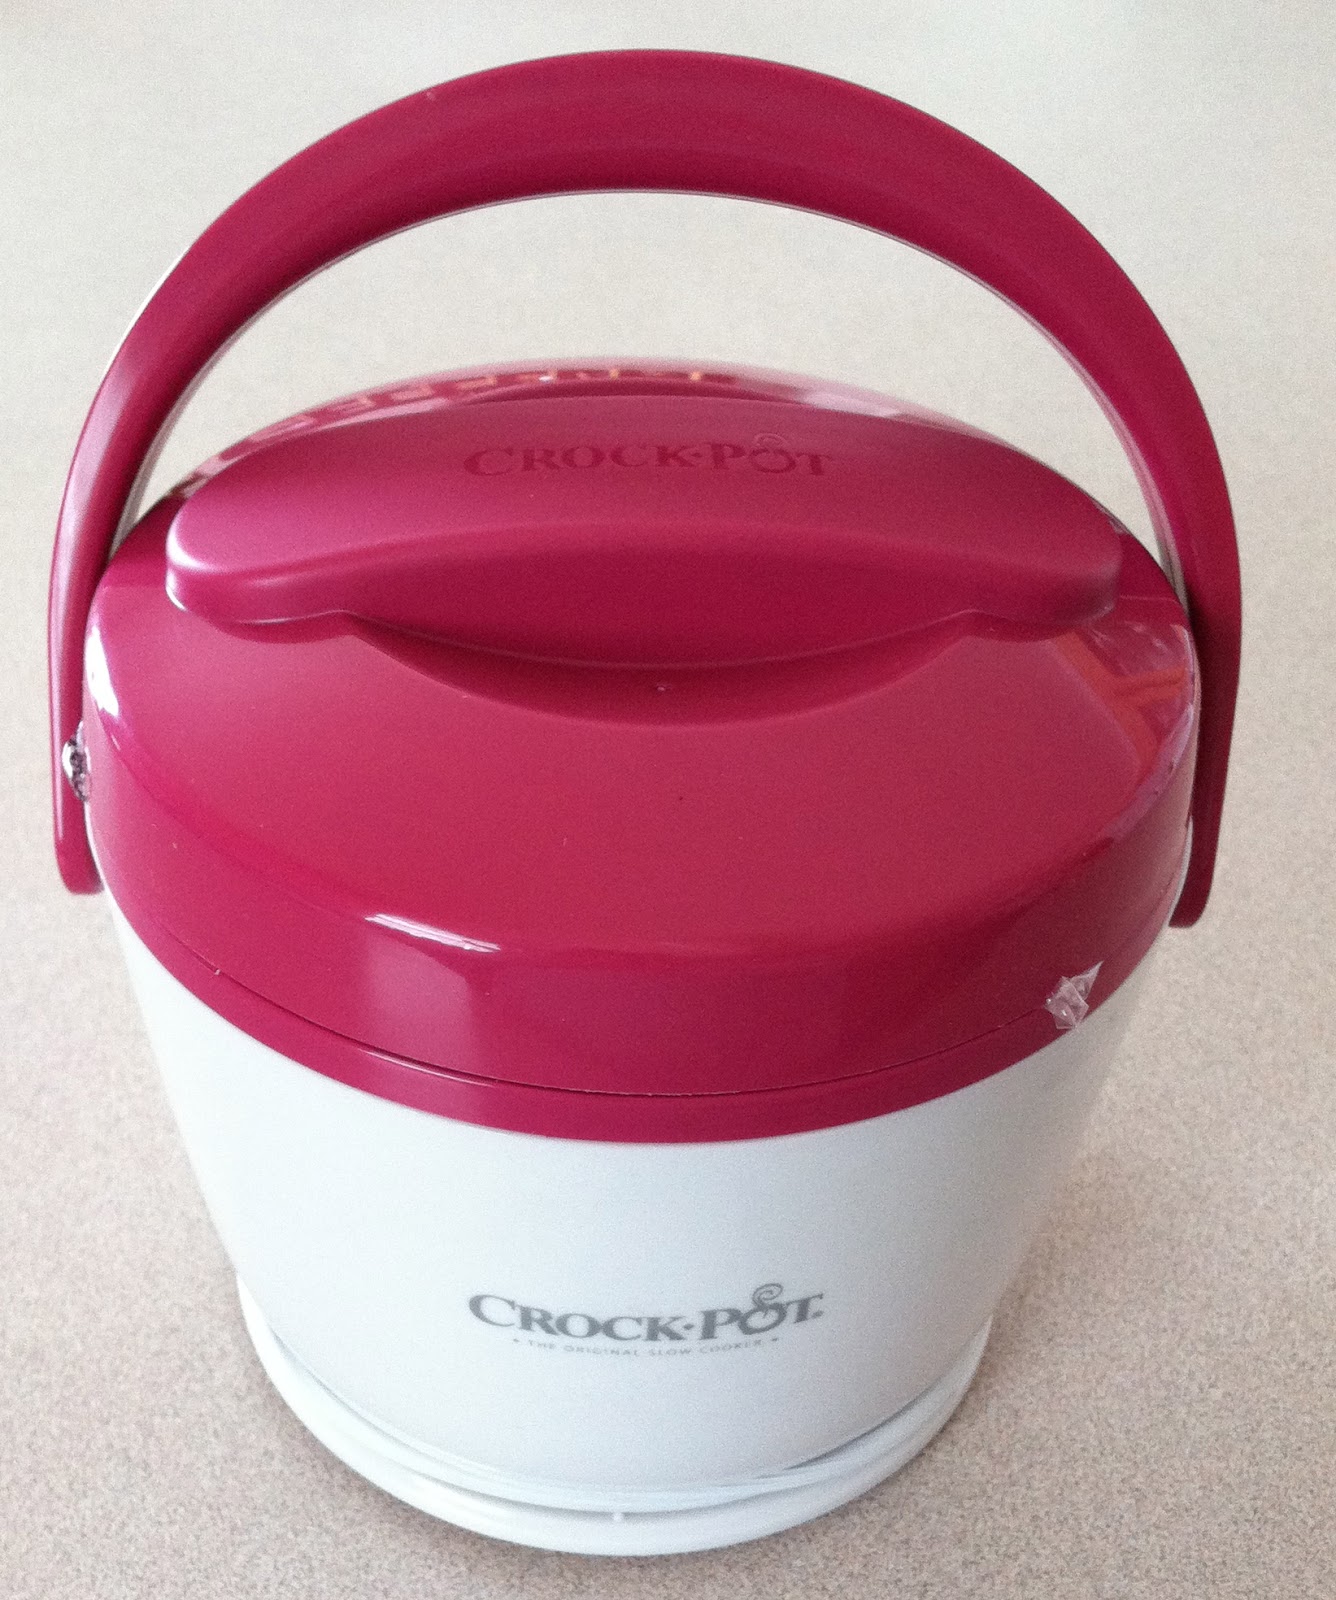 BE REAL: Review: Crock-Pot Lunch Crock